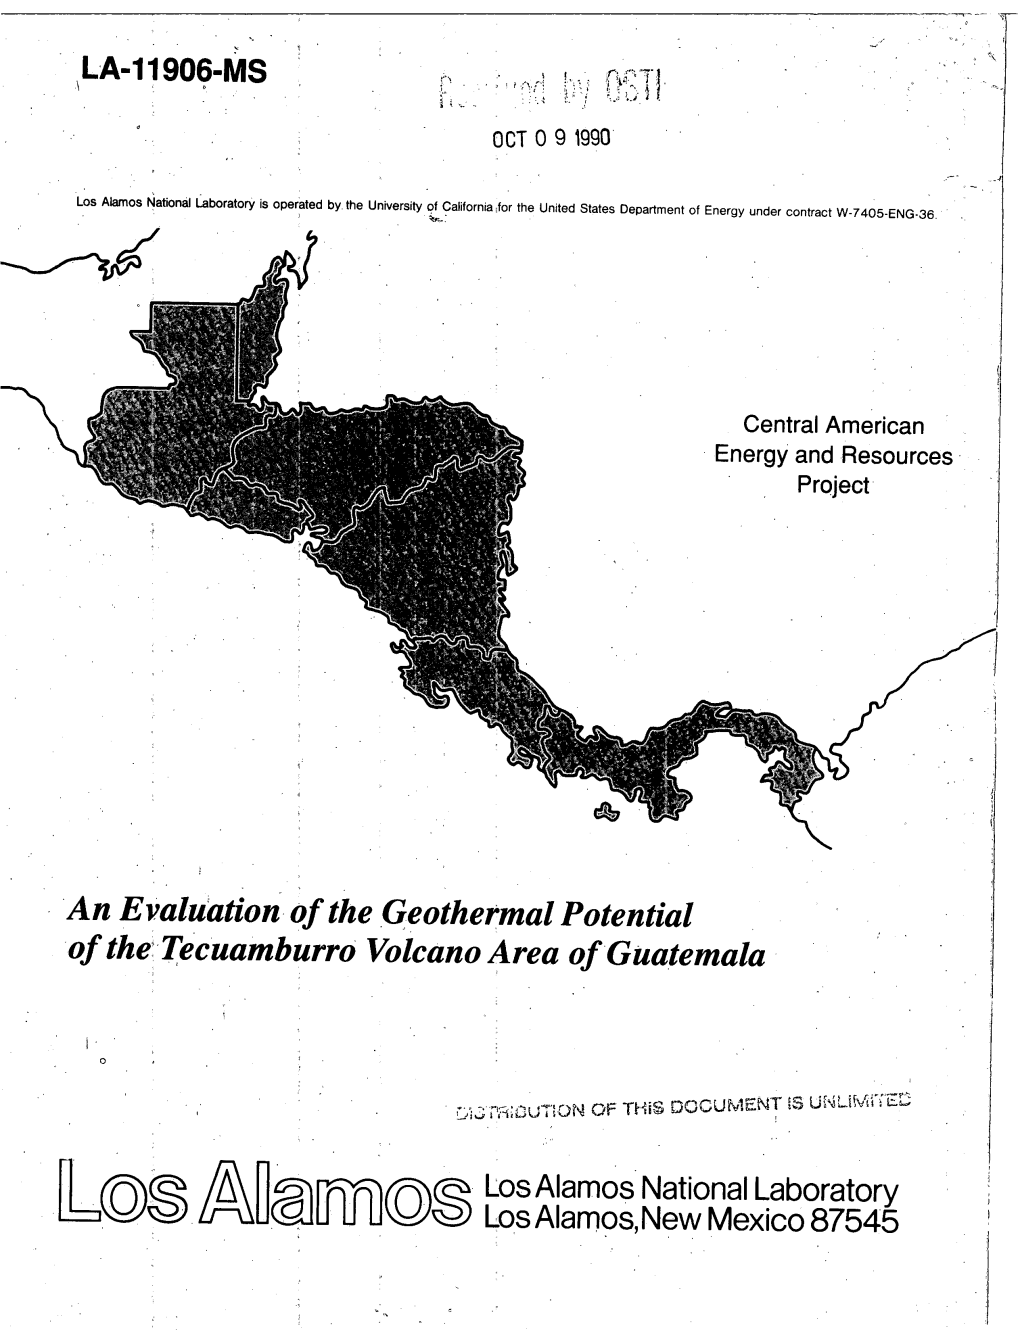 An Evaluation of the Geothermal Potential of the Tecuamburro Volcano Area of Guatemala